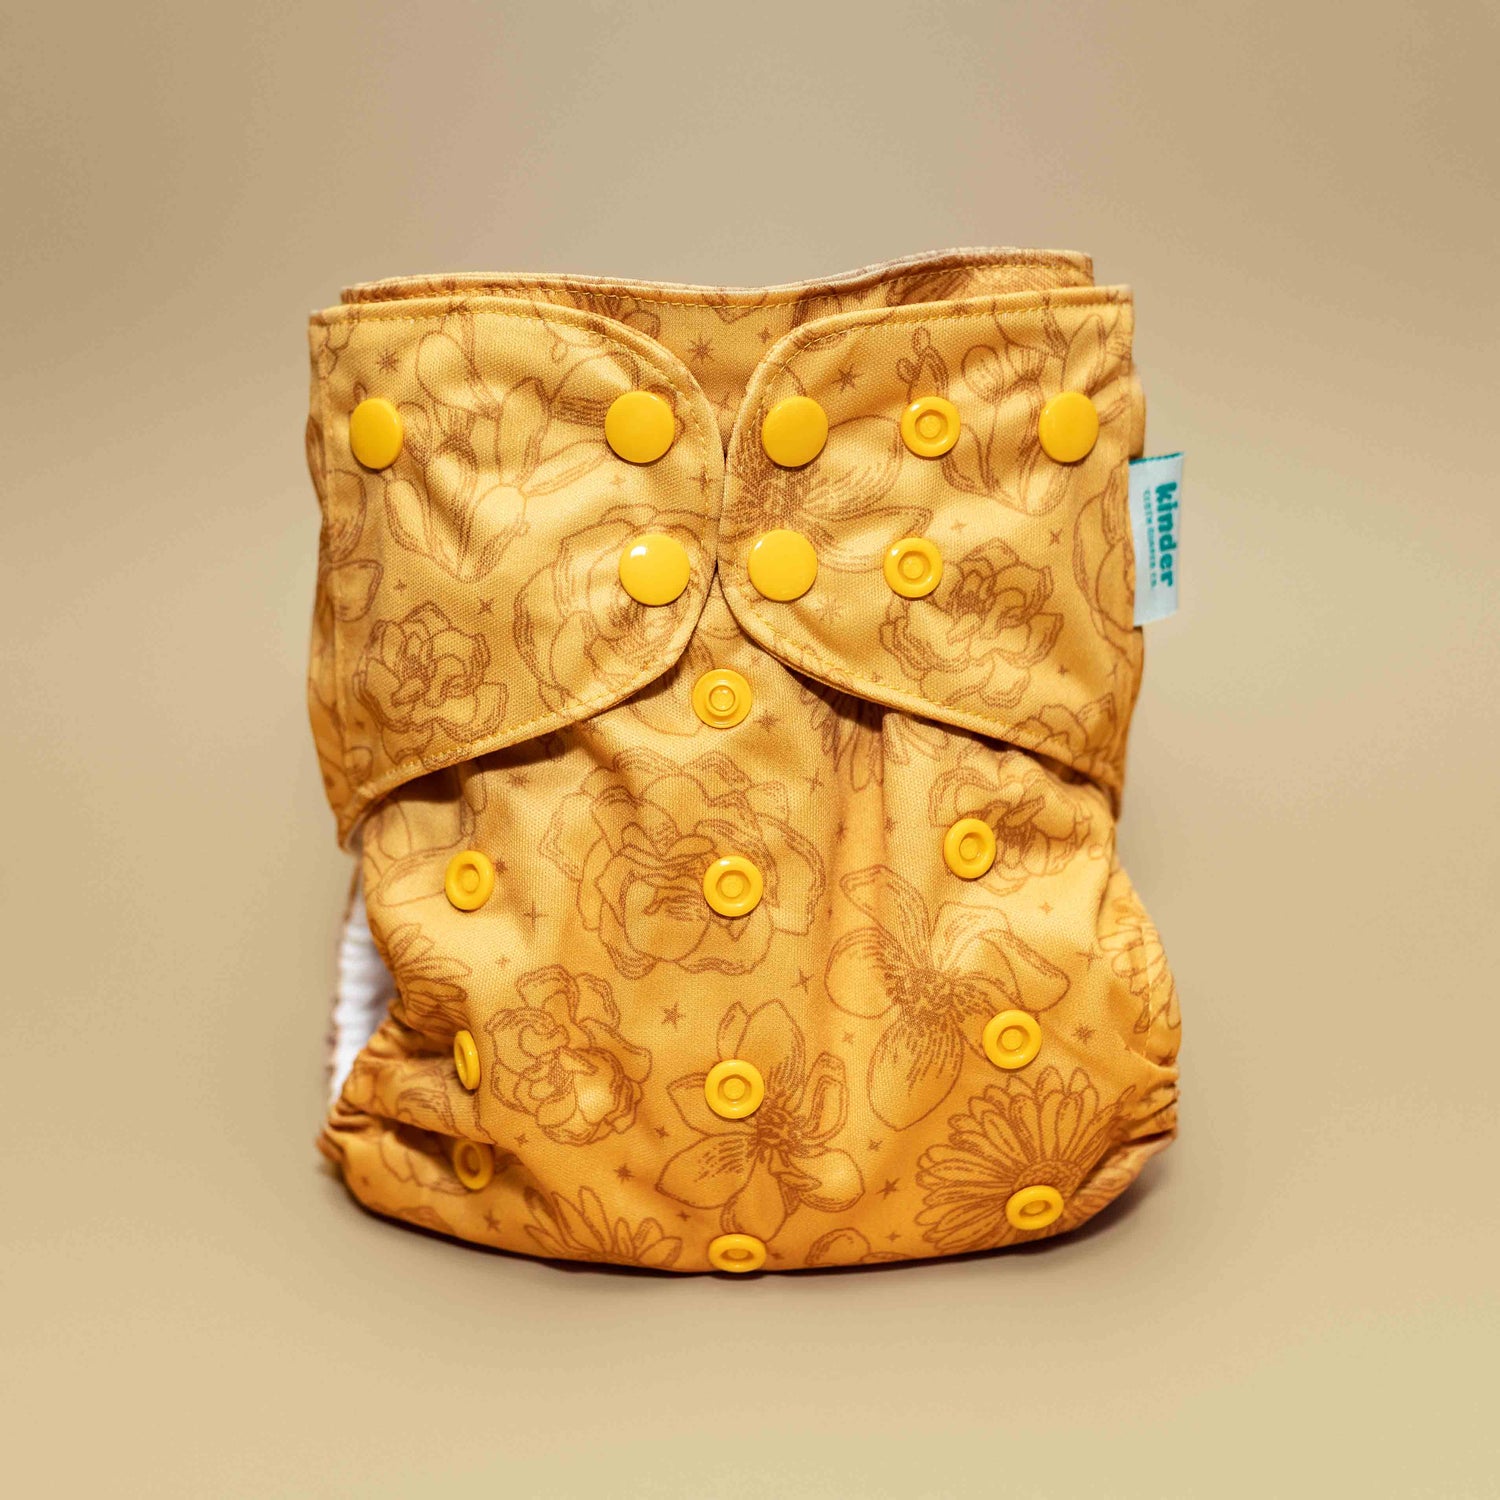 modern reusable cloth diaper with athletic wicking jersey best pocket diapers kinder cloth pittsburgh usa diaper brands